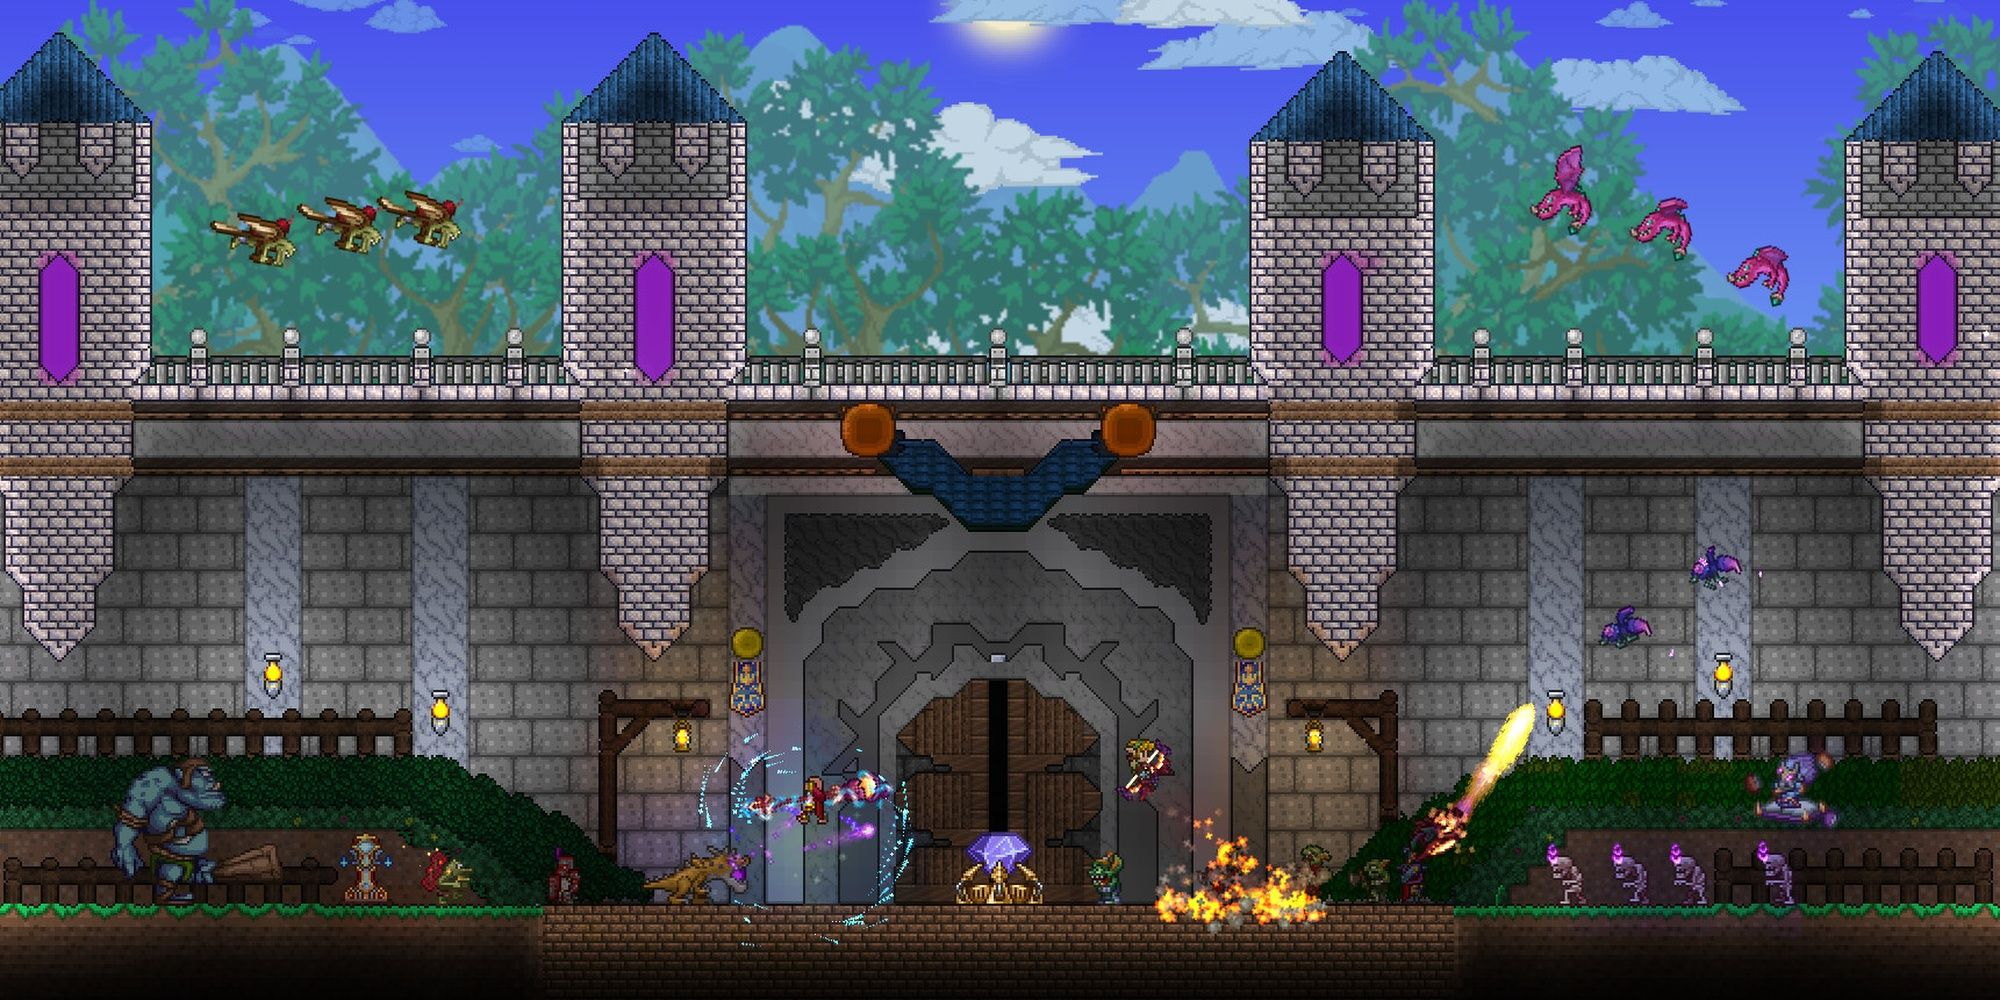 Terraria: Fighting Fantasy Creatures In A Palace Biome